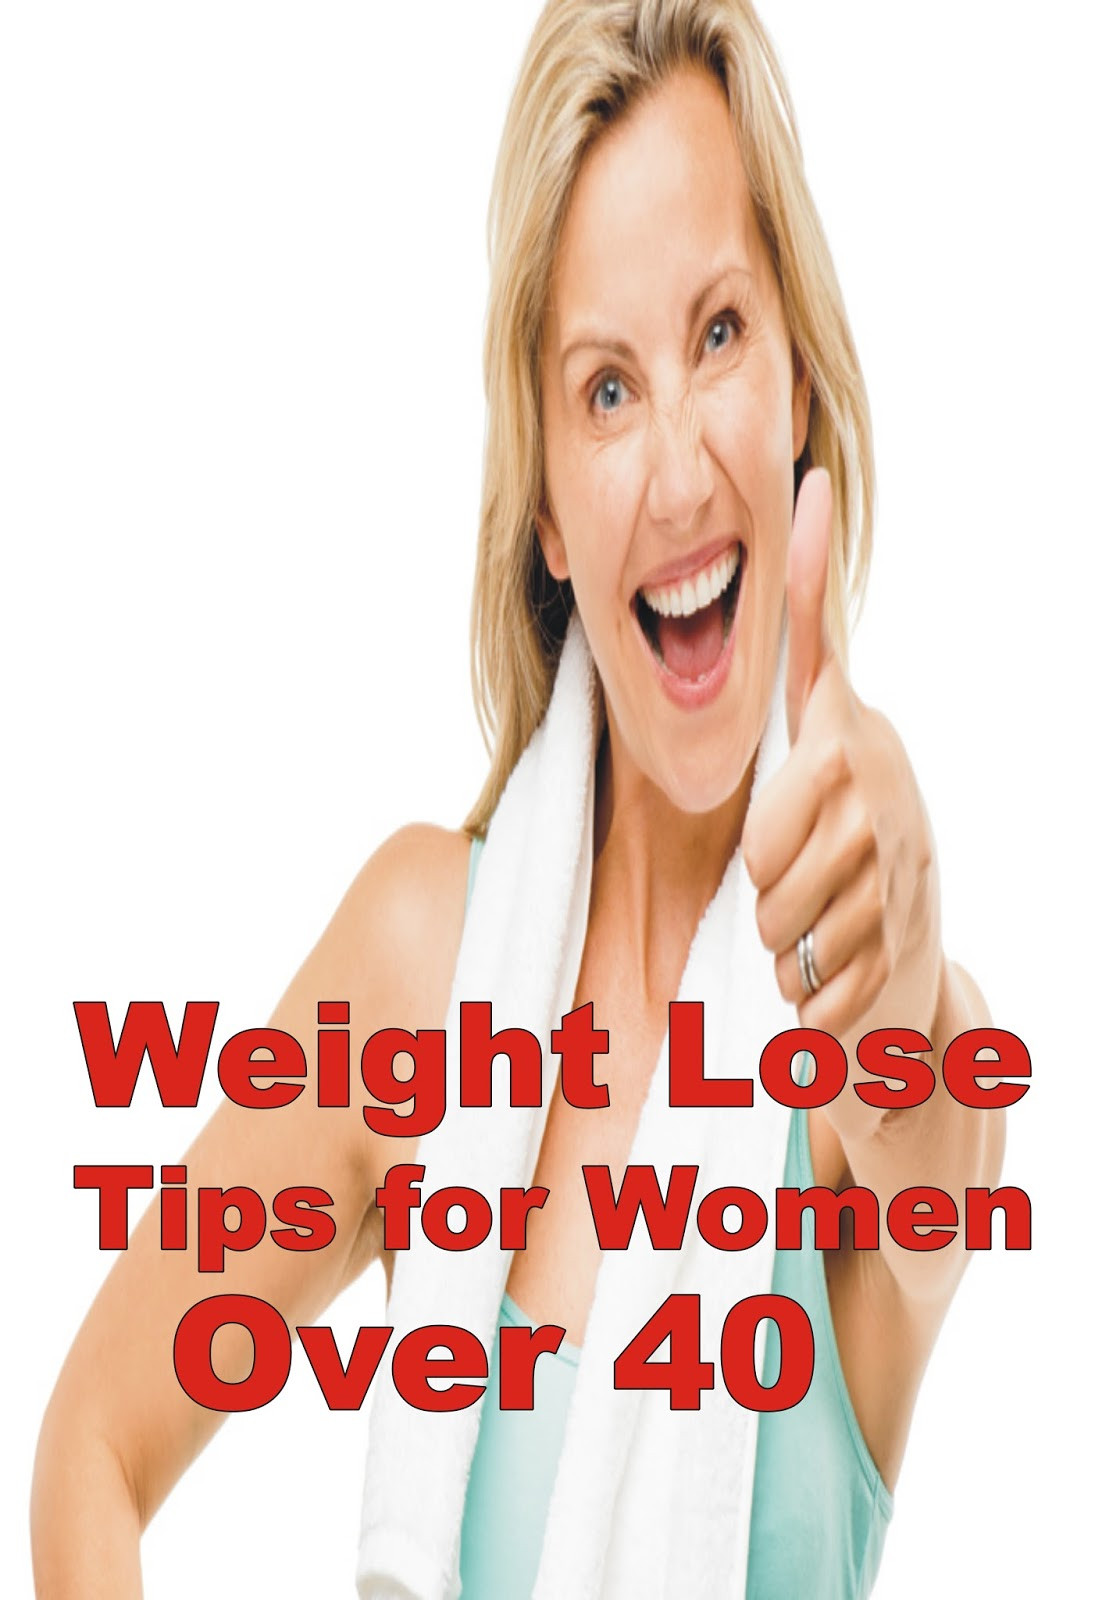 How To Lose Weight Over 40
 Lose Weight tips for Women Over 40 WeightLoss